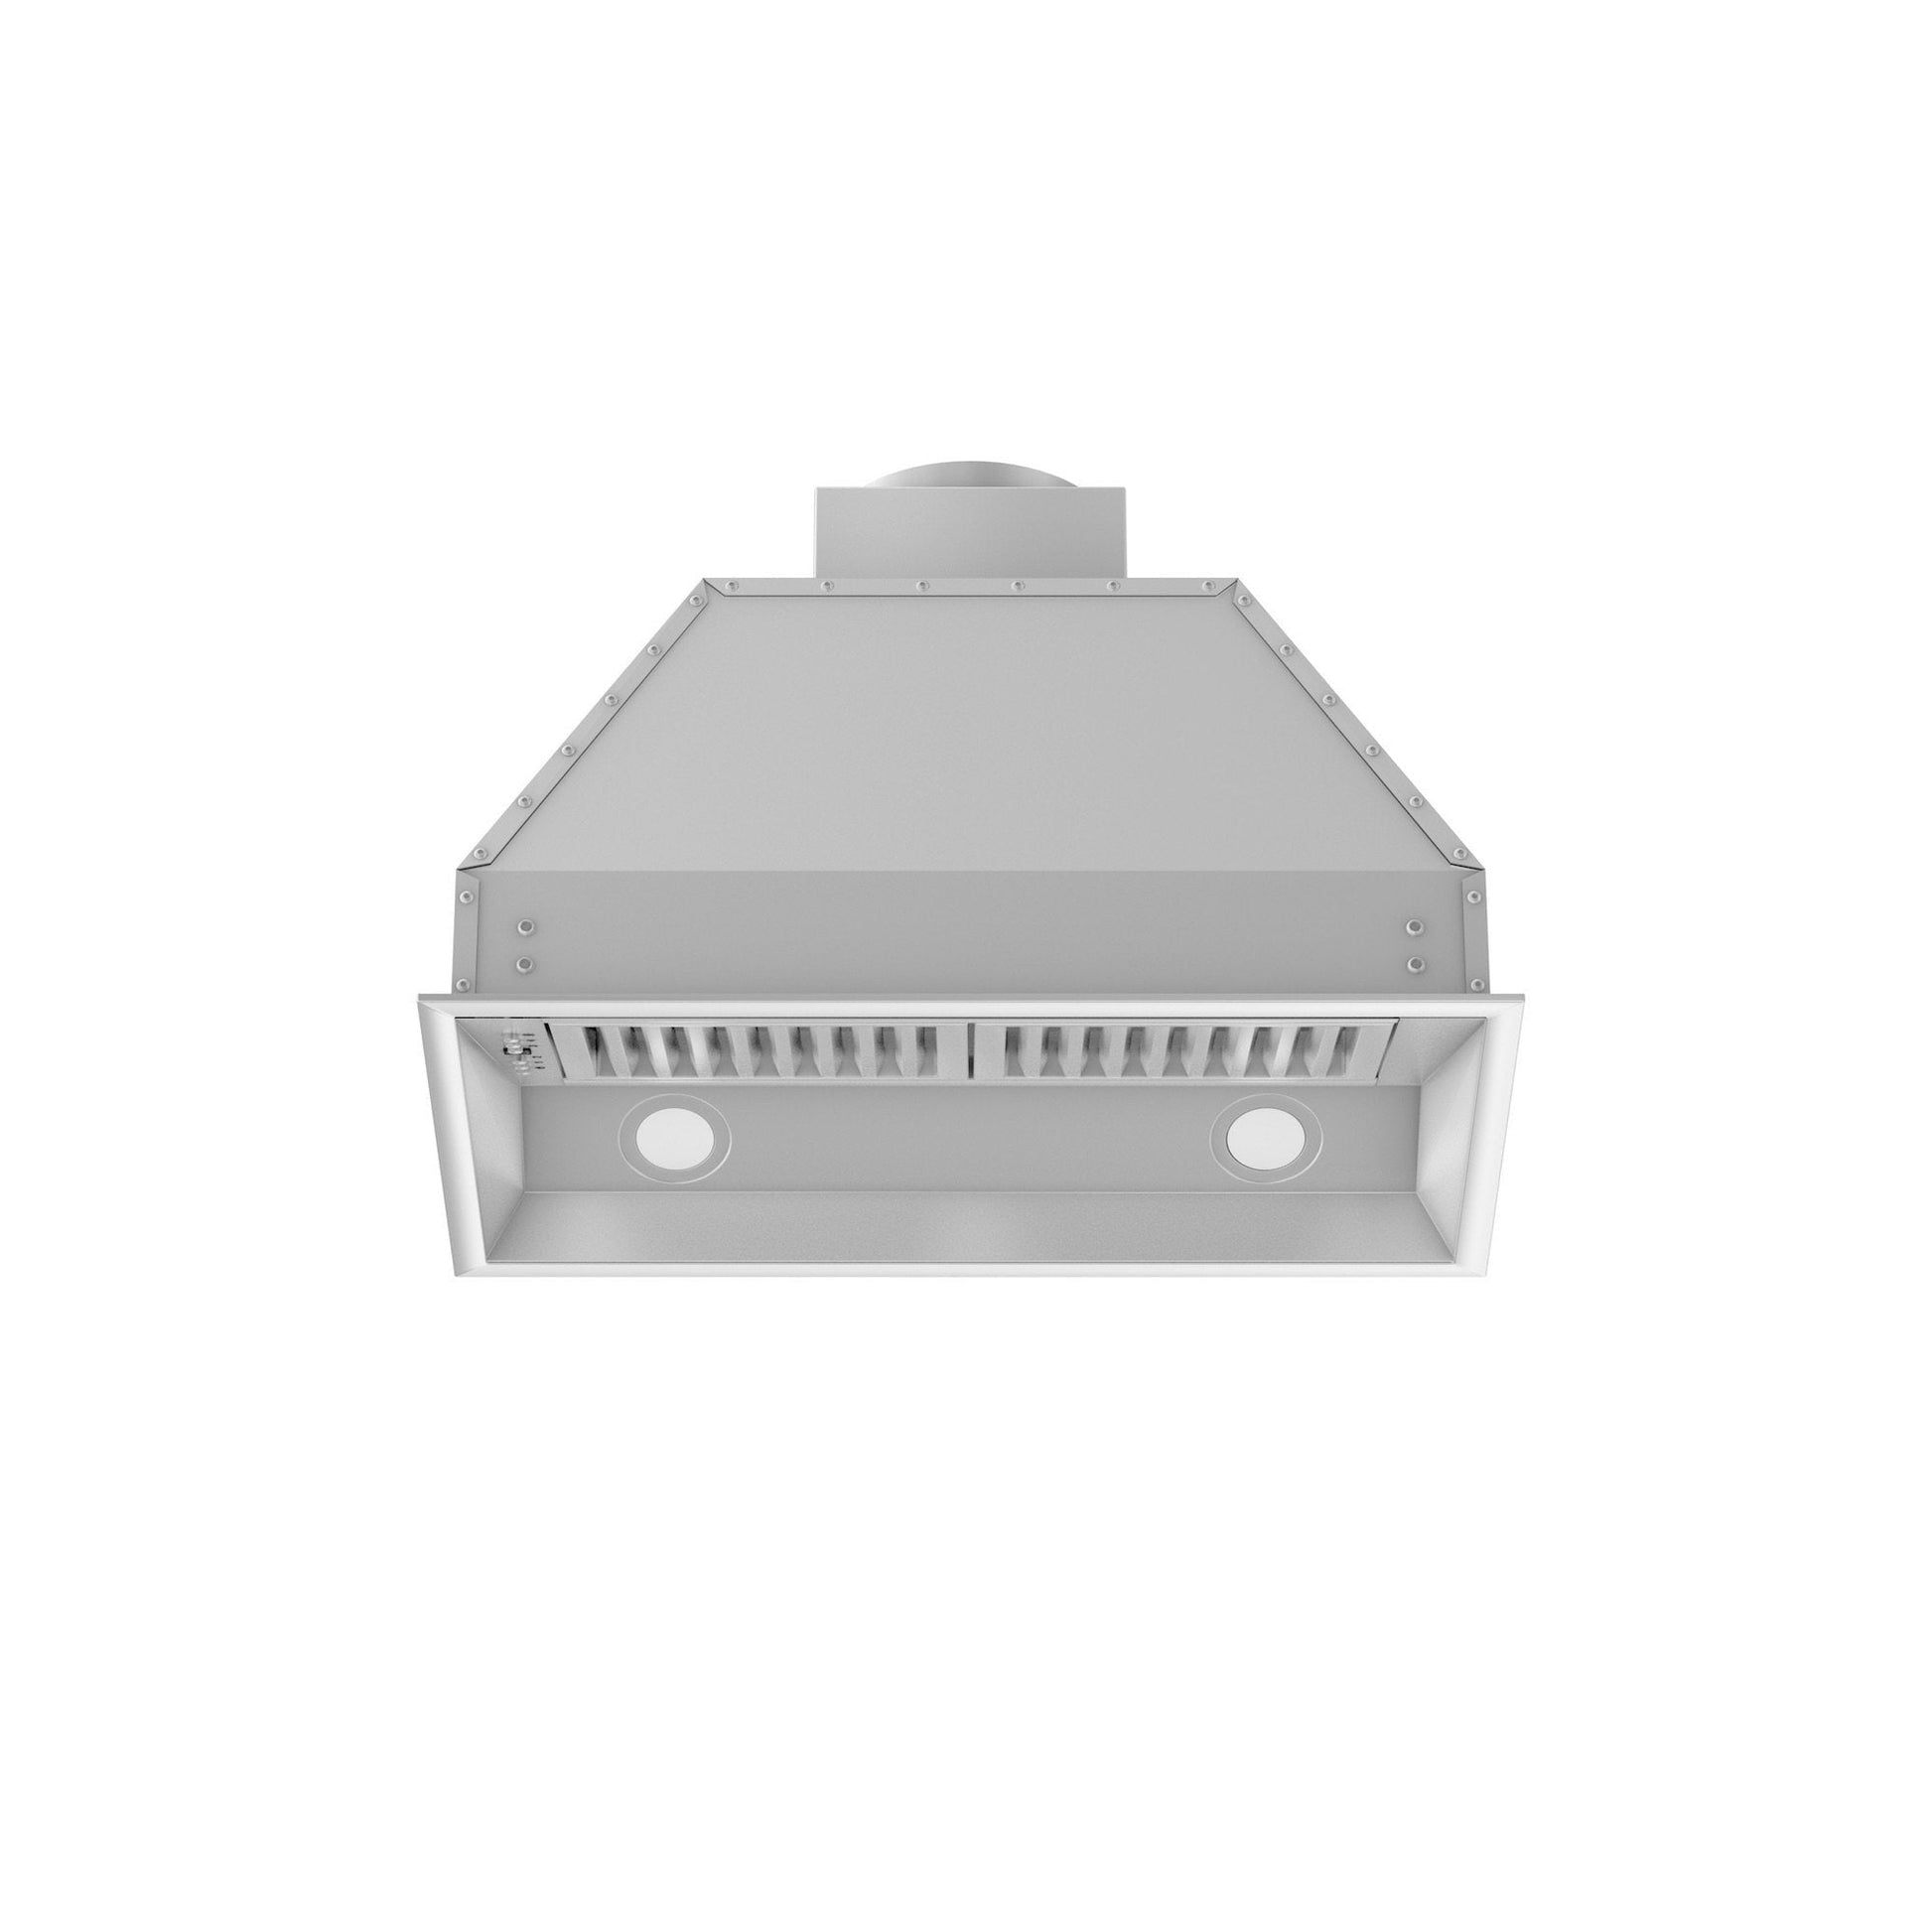 ZLINE Double Remote Blower Ducted Range Hood Insert - Stainless Steel in 700 CFM